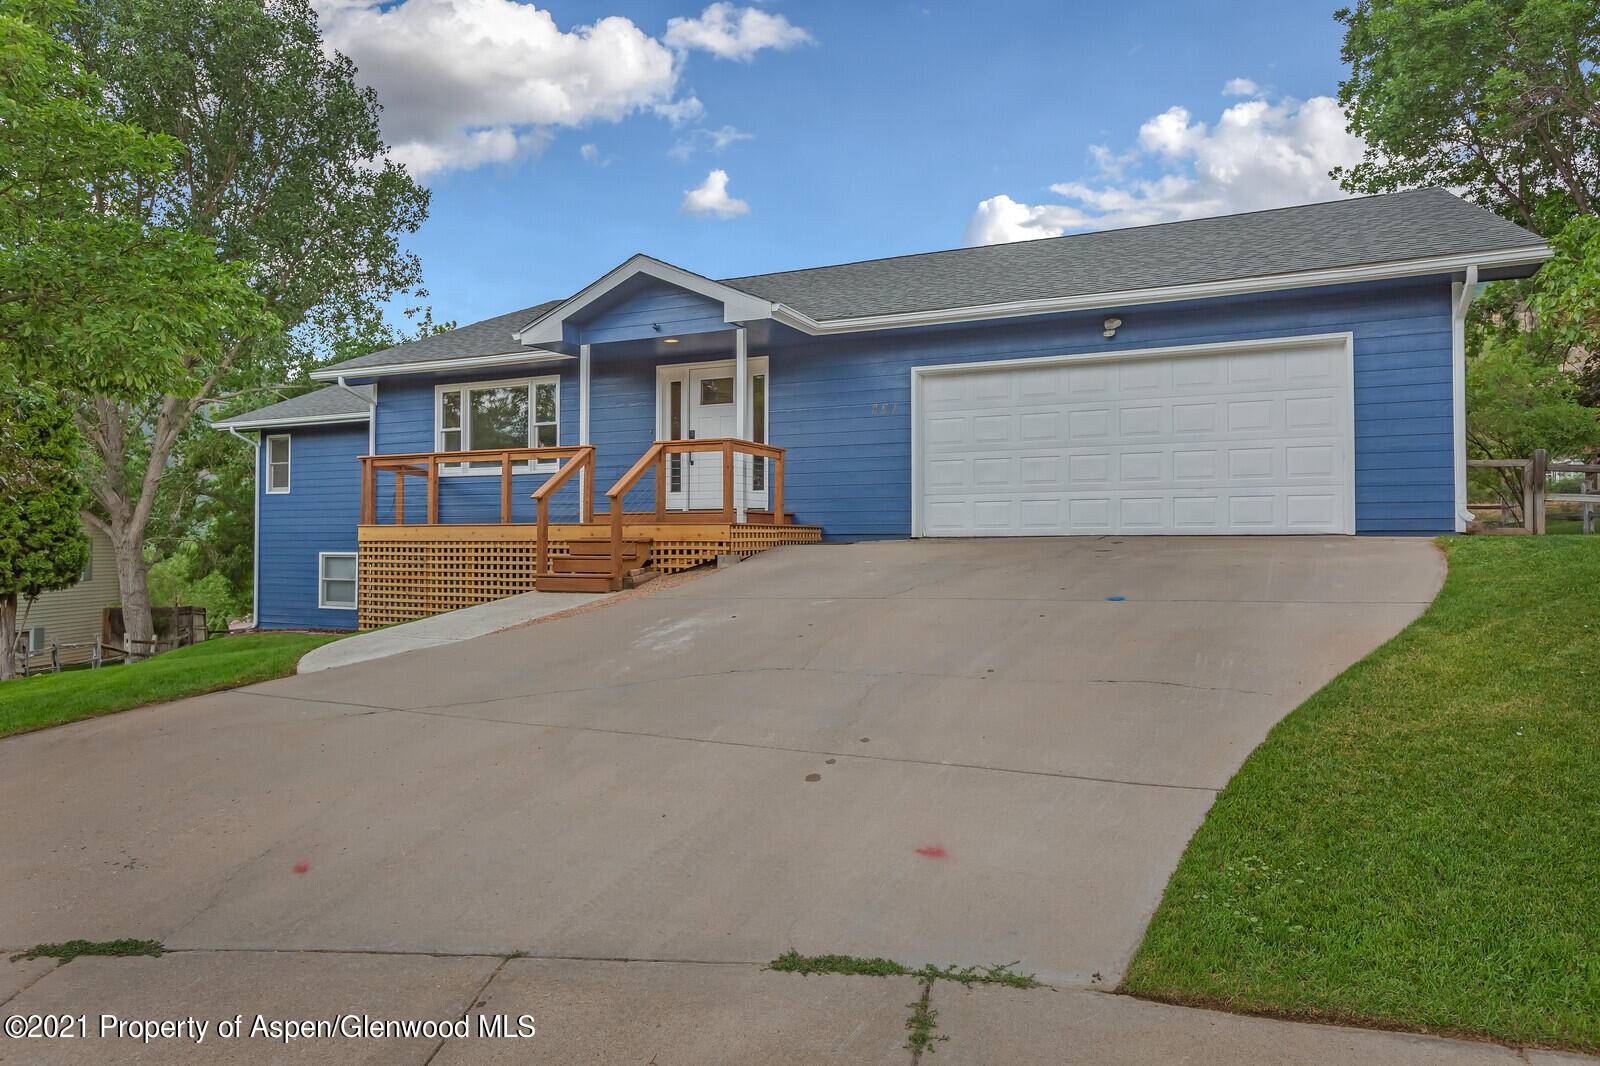 One of the best valued homes currently listed in Glenwood Springs at just under 237 SqFt !